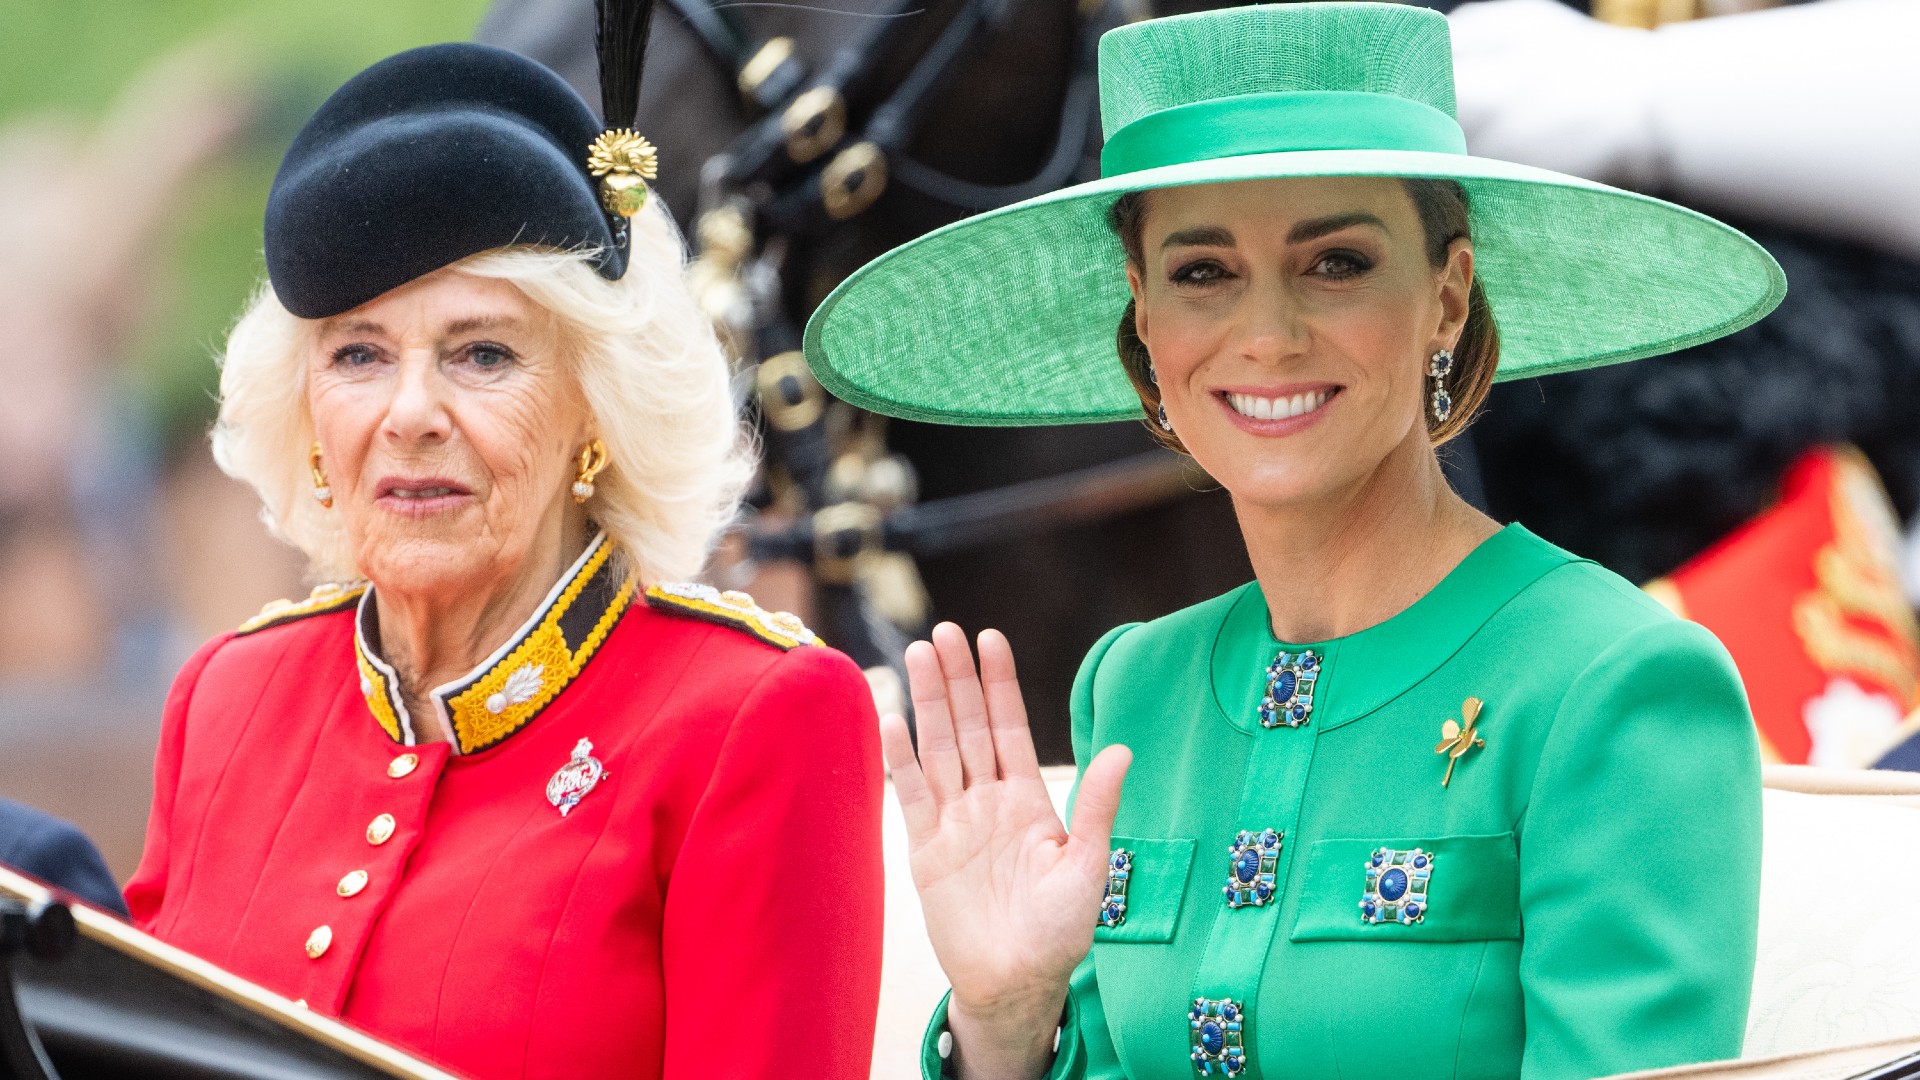 Kate Middleton's symbolic green dress at Trooping the Colour | Woman & Home